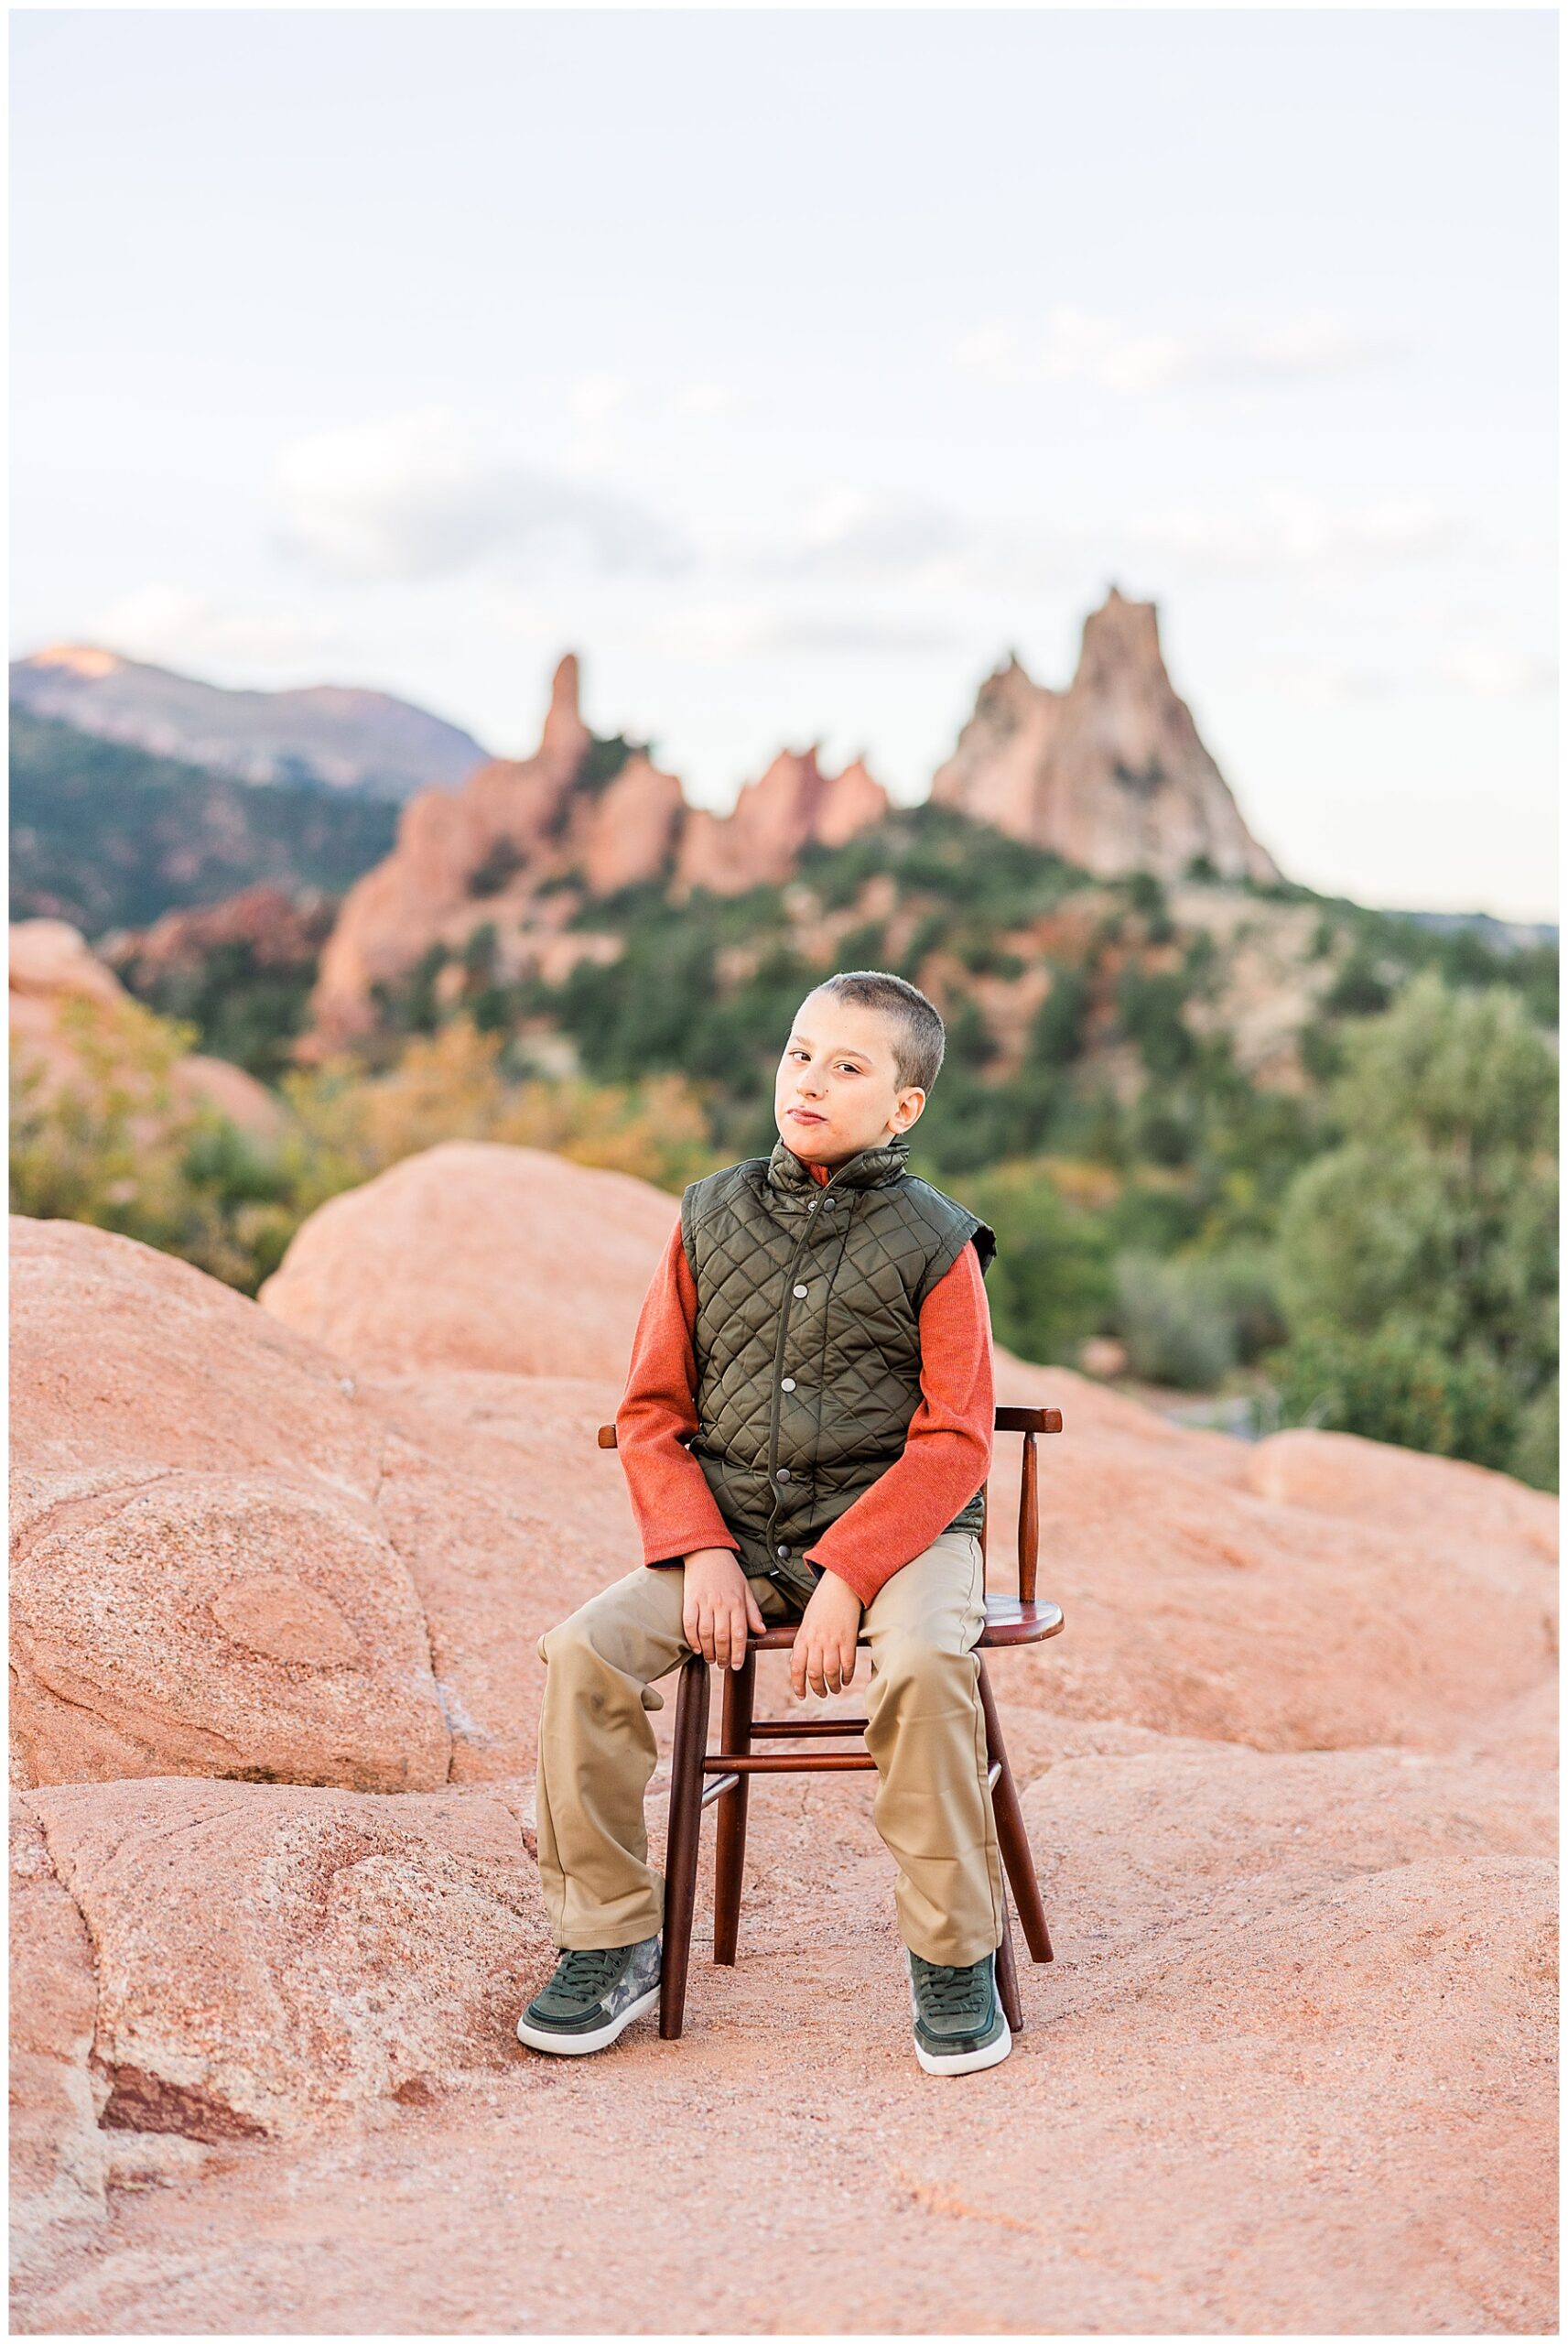 Boy sits and poses on a chair with rock formations in the background during a Colorado Springs Family Session